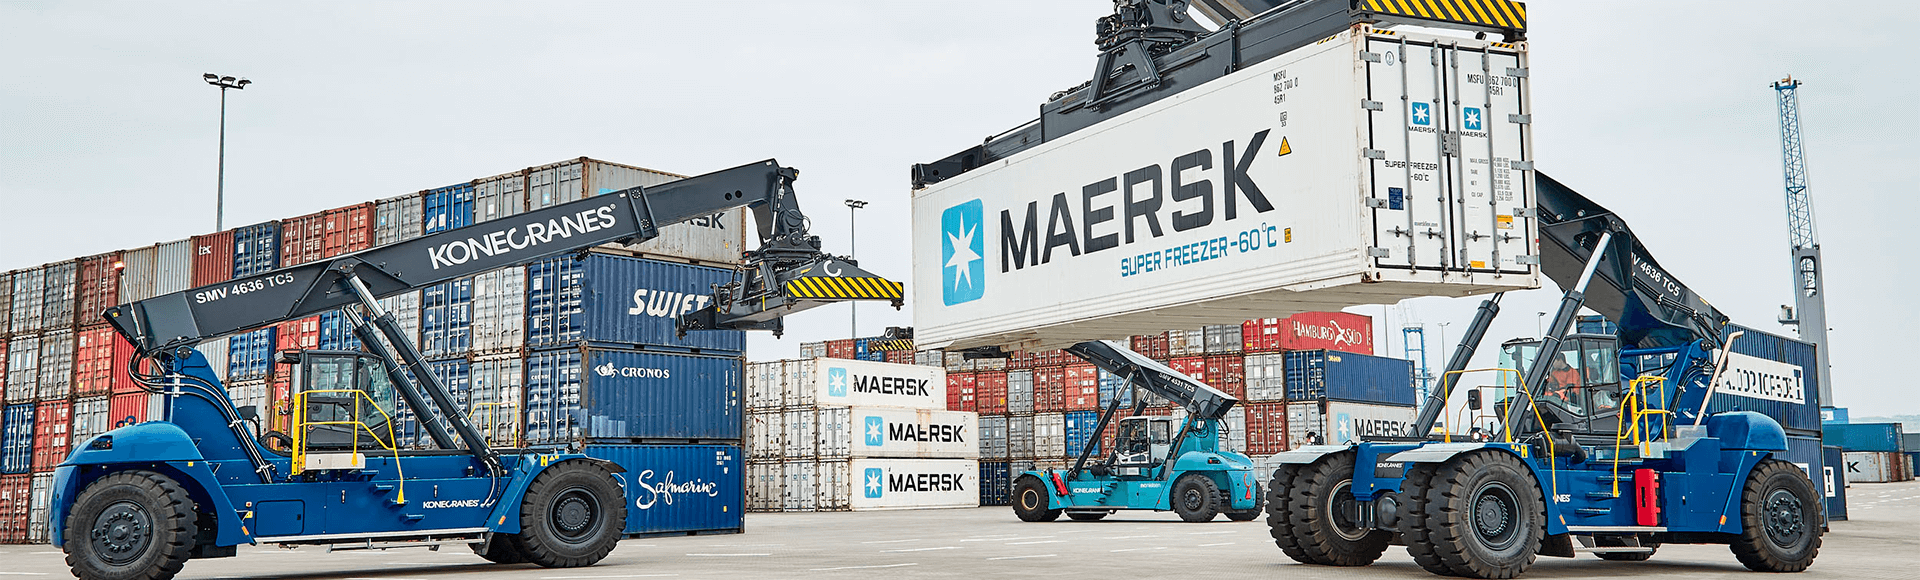 N.C. Nielsen ensures container operations in recordtime